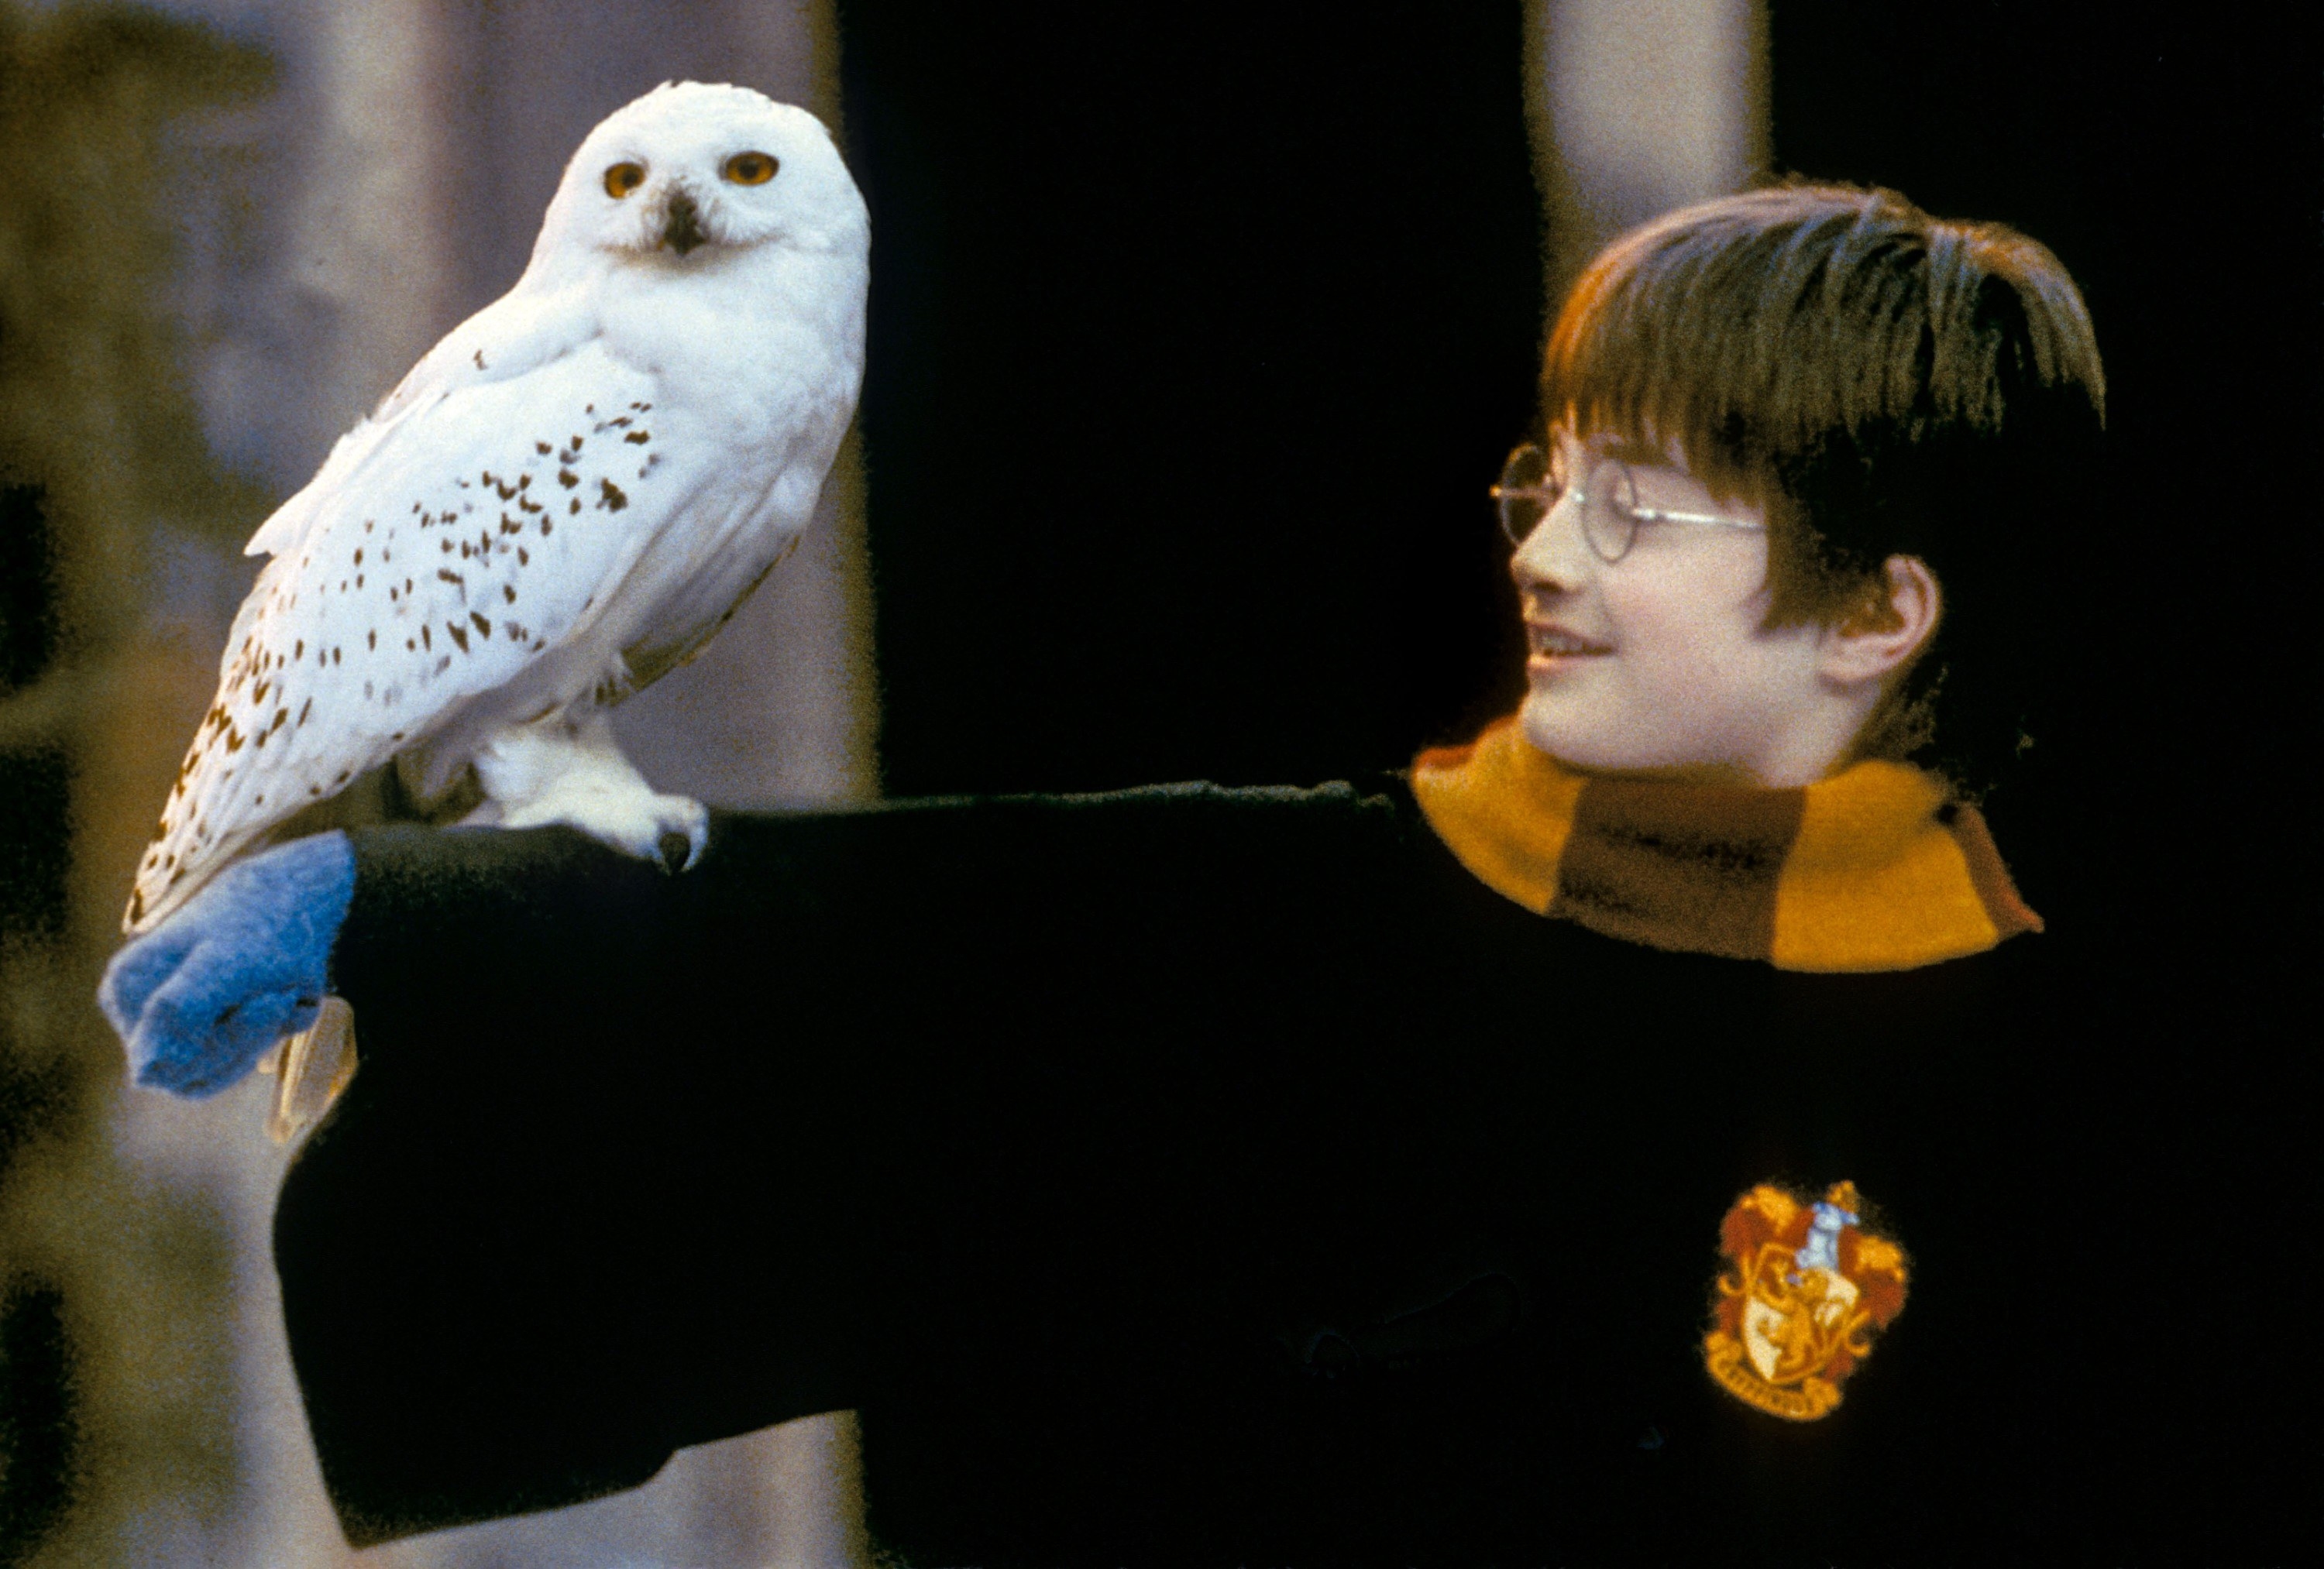 Radcliffe holds his arm outstretched with an owl on it